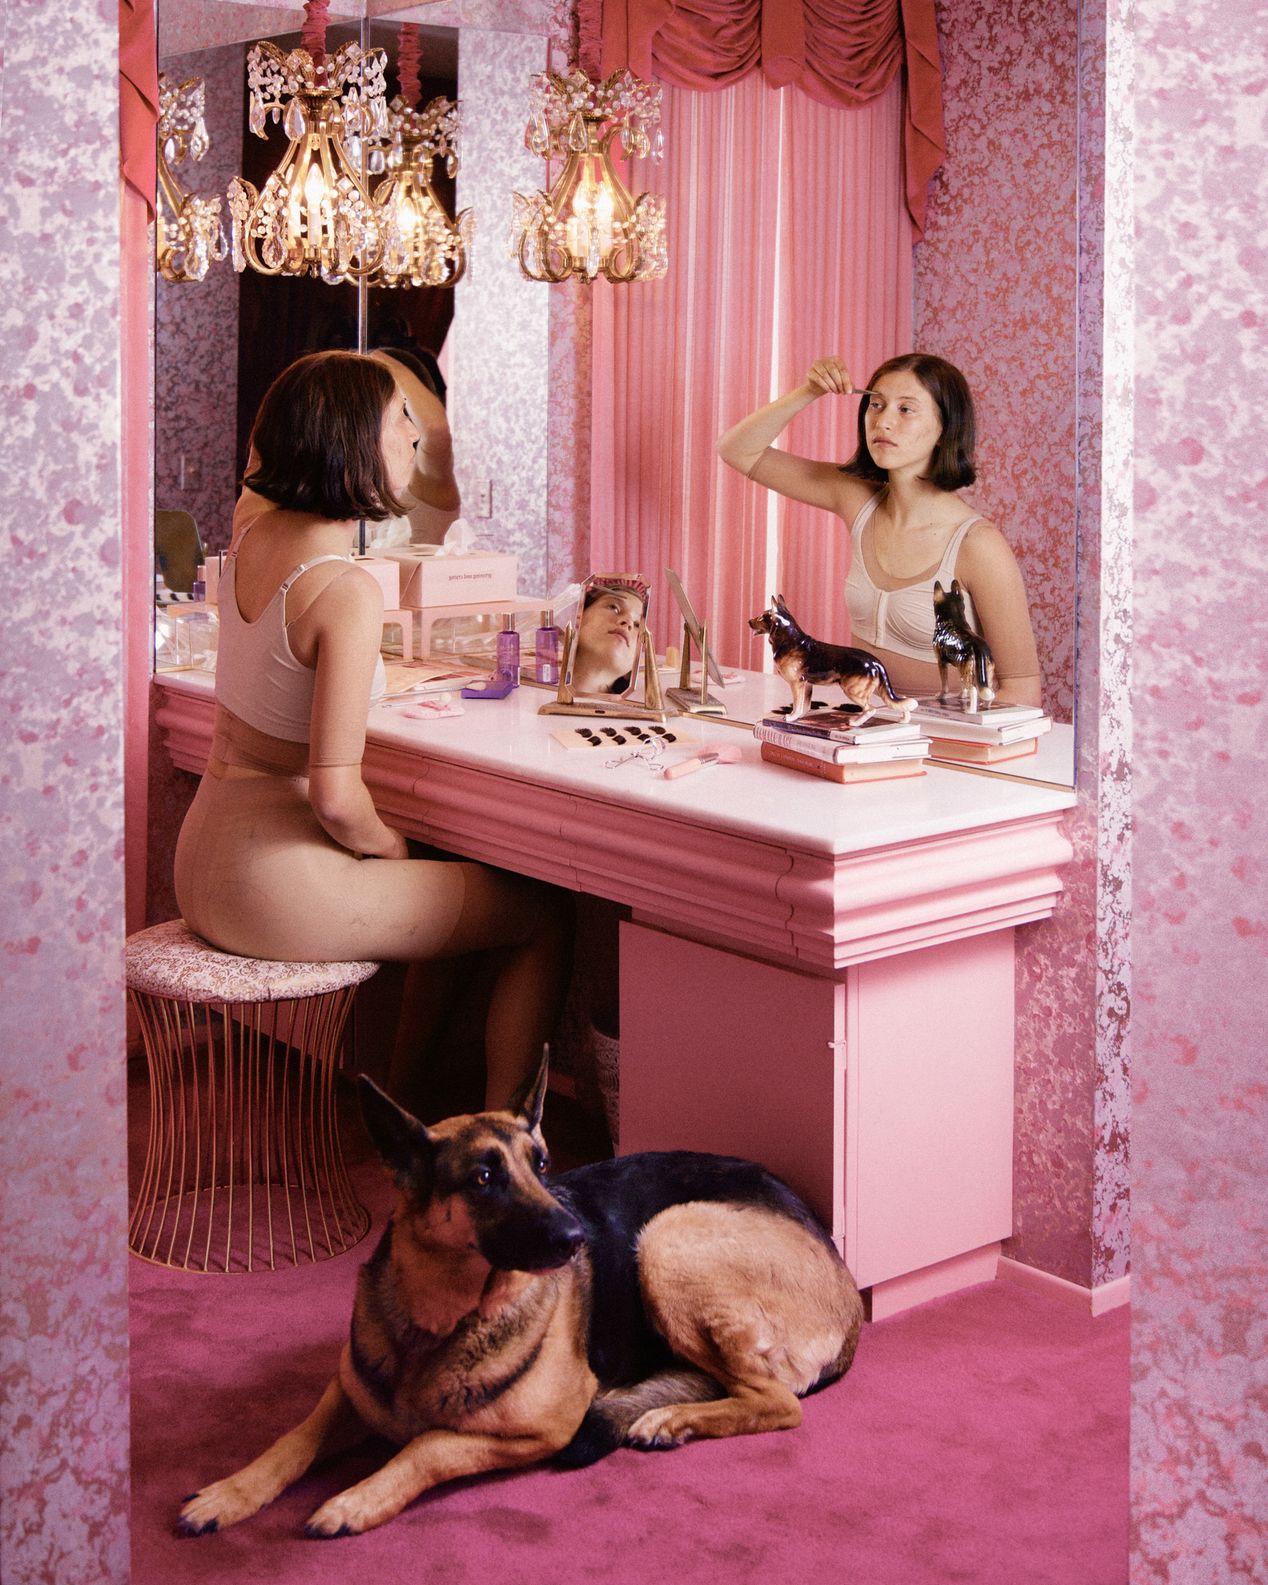 A young woman and her dog at her vanity applying makeup, art photography, Ilona Szwarc, contemporary Los Angeles artist.